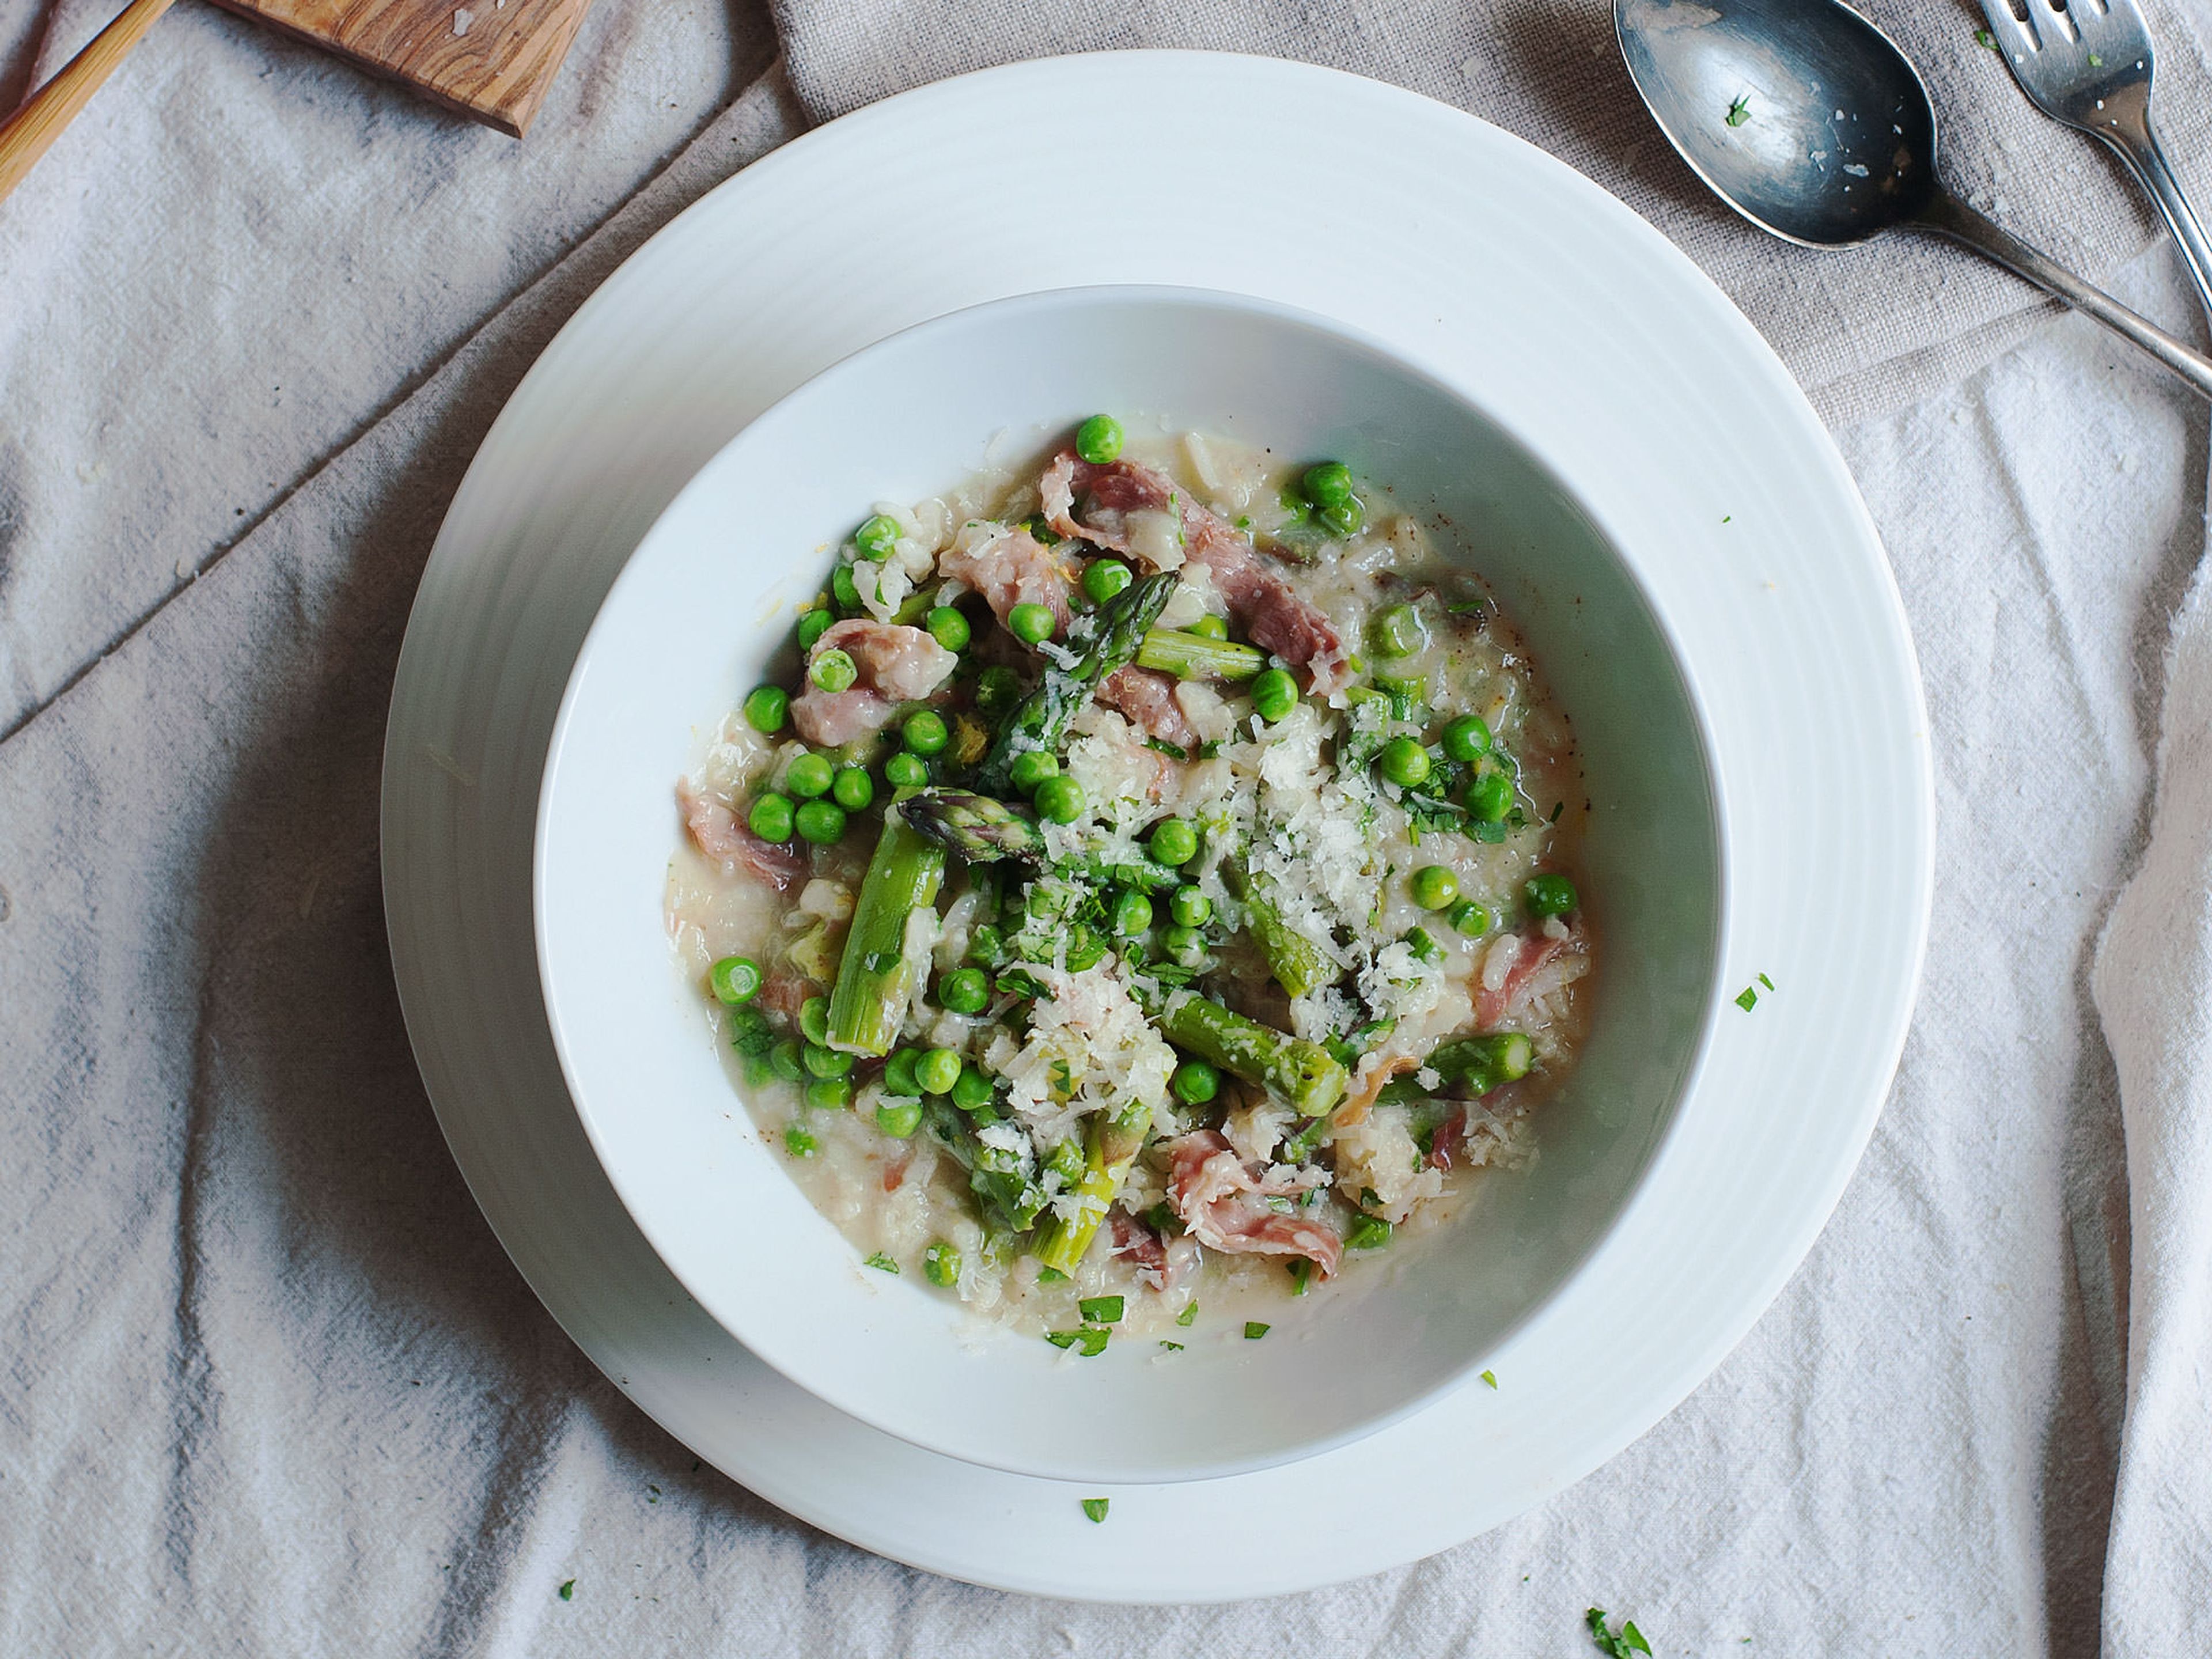 Asparagus risotto with peas and prosciutto